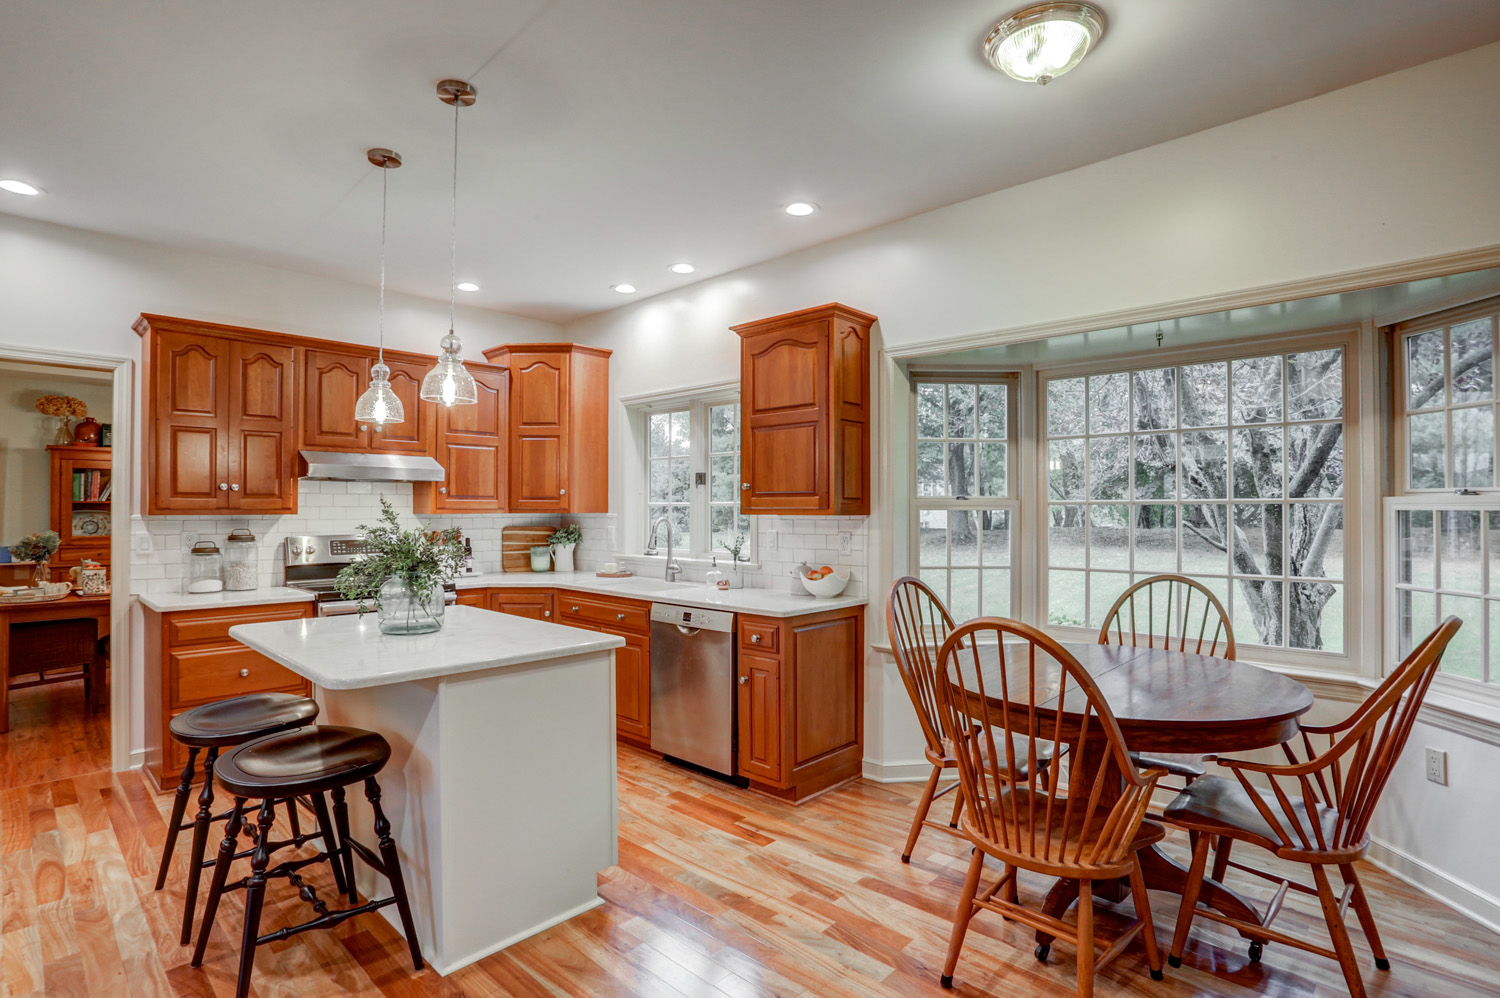 Centerville Kitchen Refresh with island and new lighting